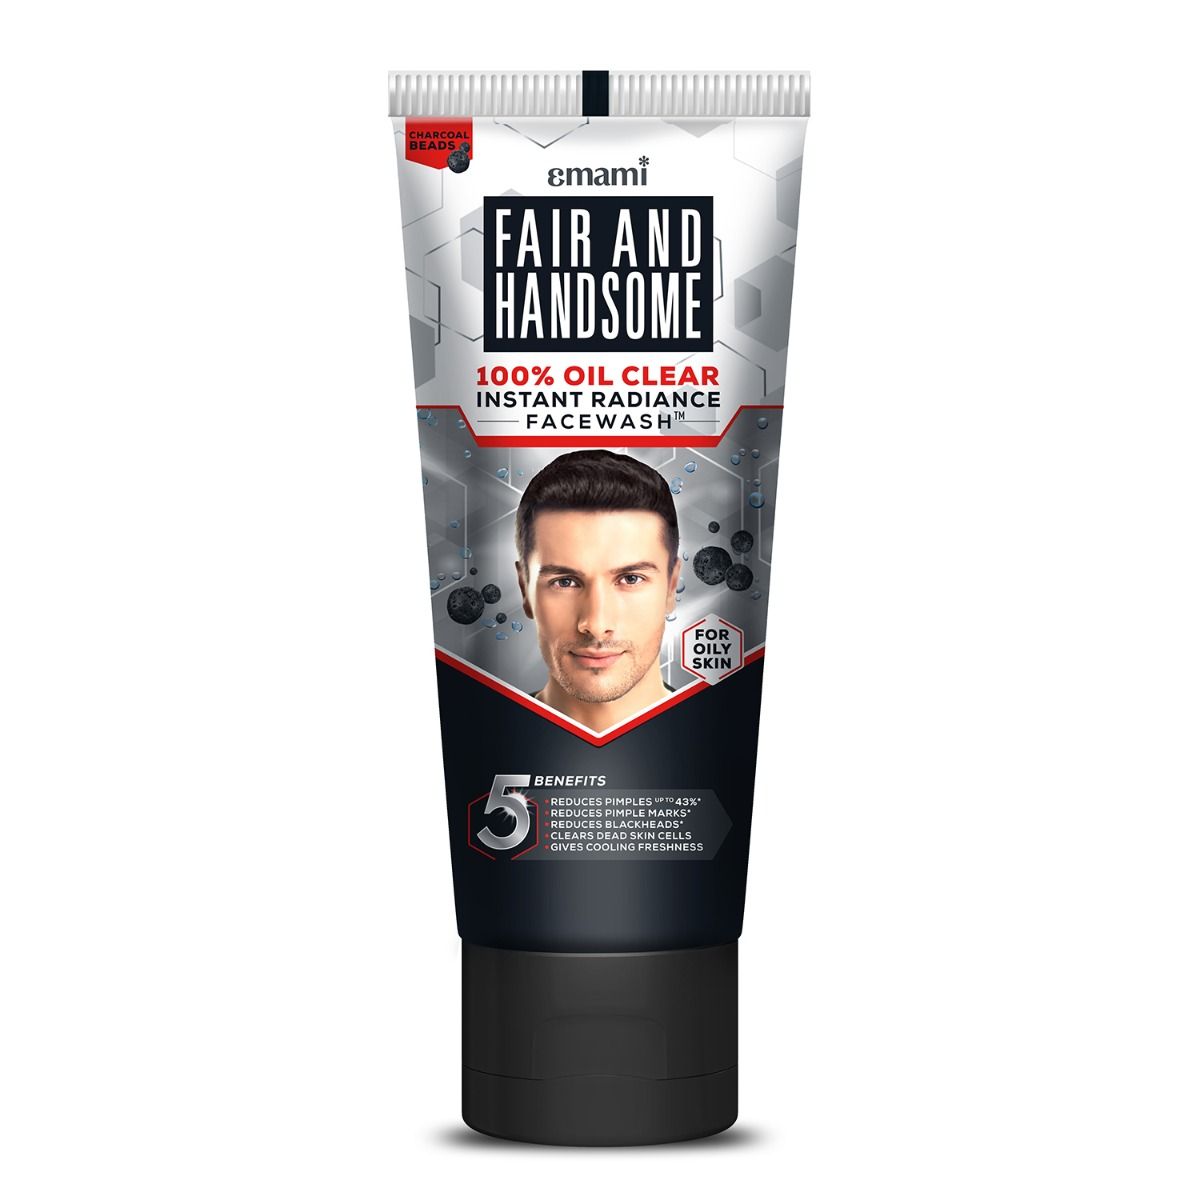 Fair and Handsome 100% Oil Clear Instant Radiance Face Wash, 50 gm, Pack of 1 